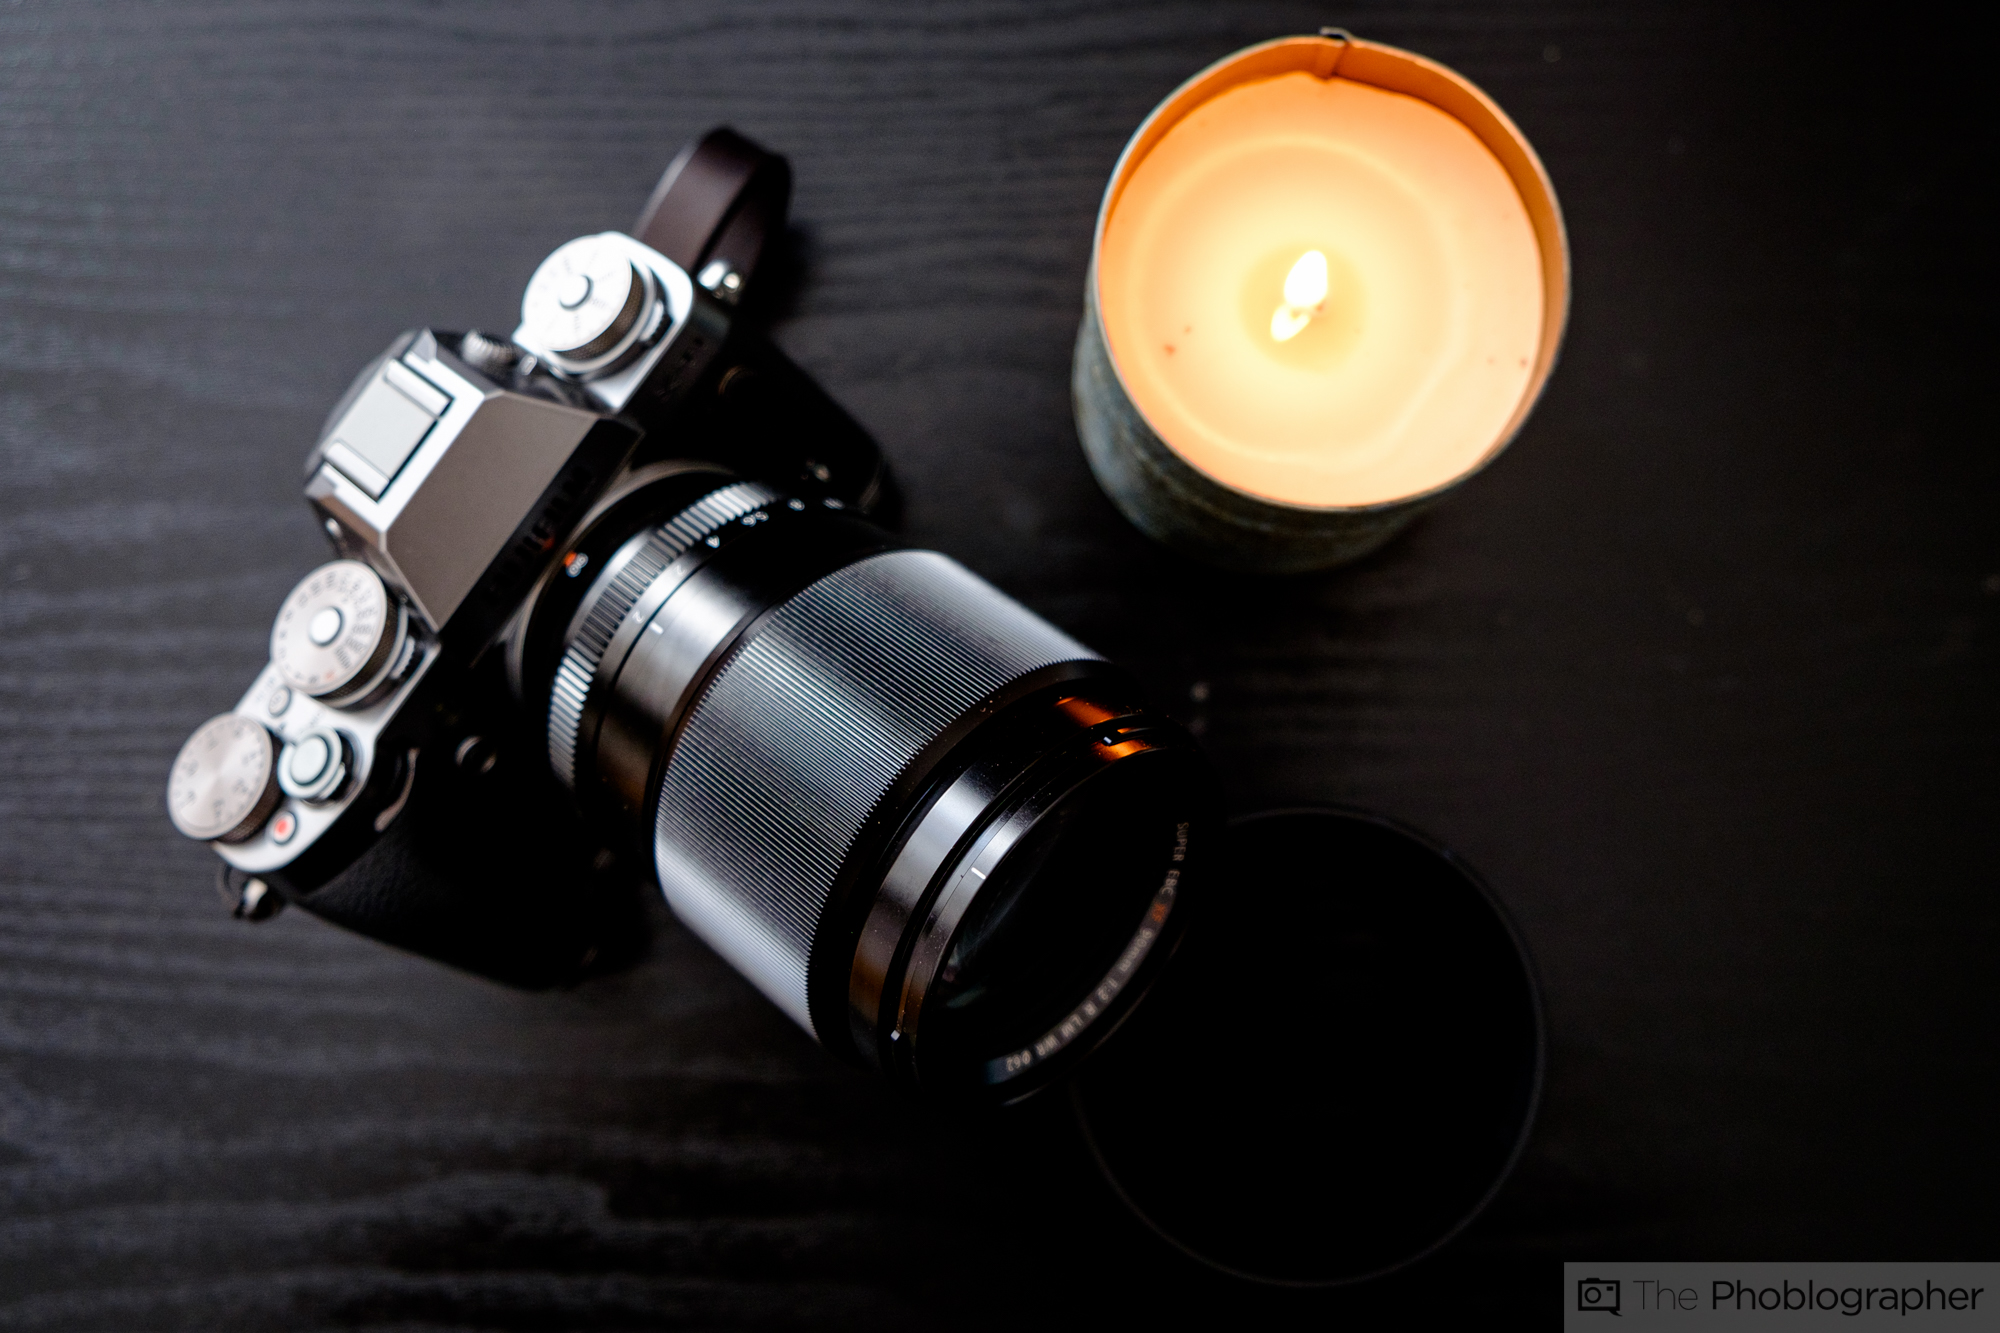 You’ll Love the Bokeh These Great APS-C Portrait Lenses Create